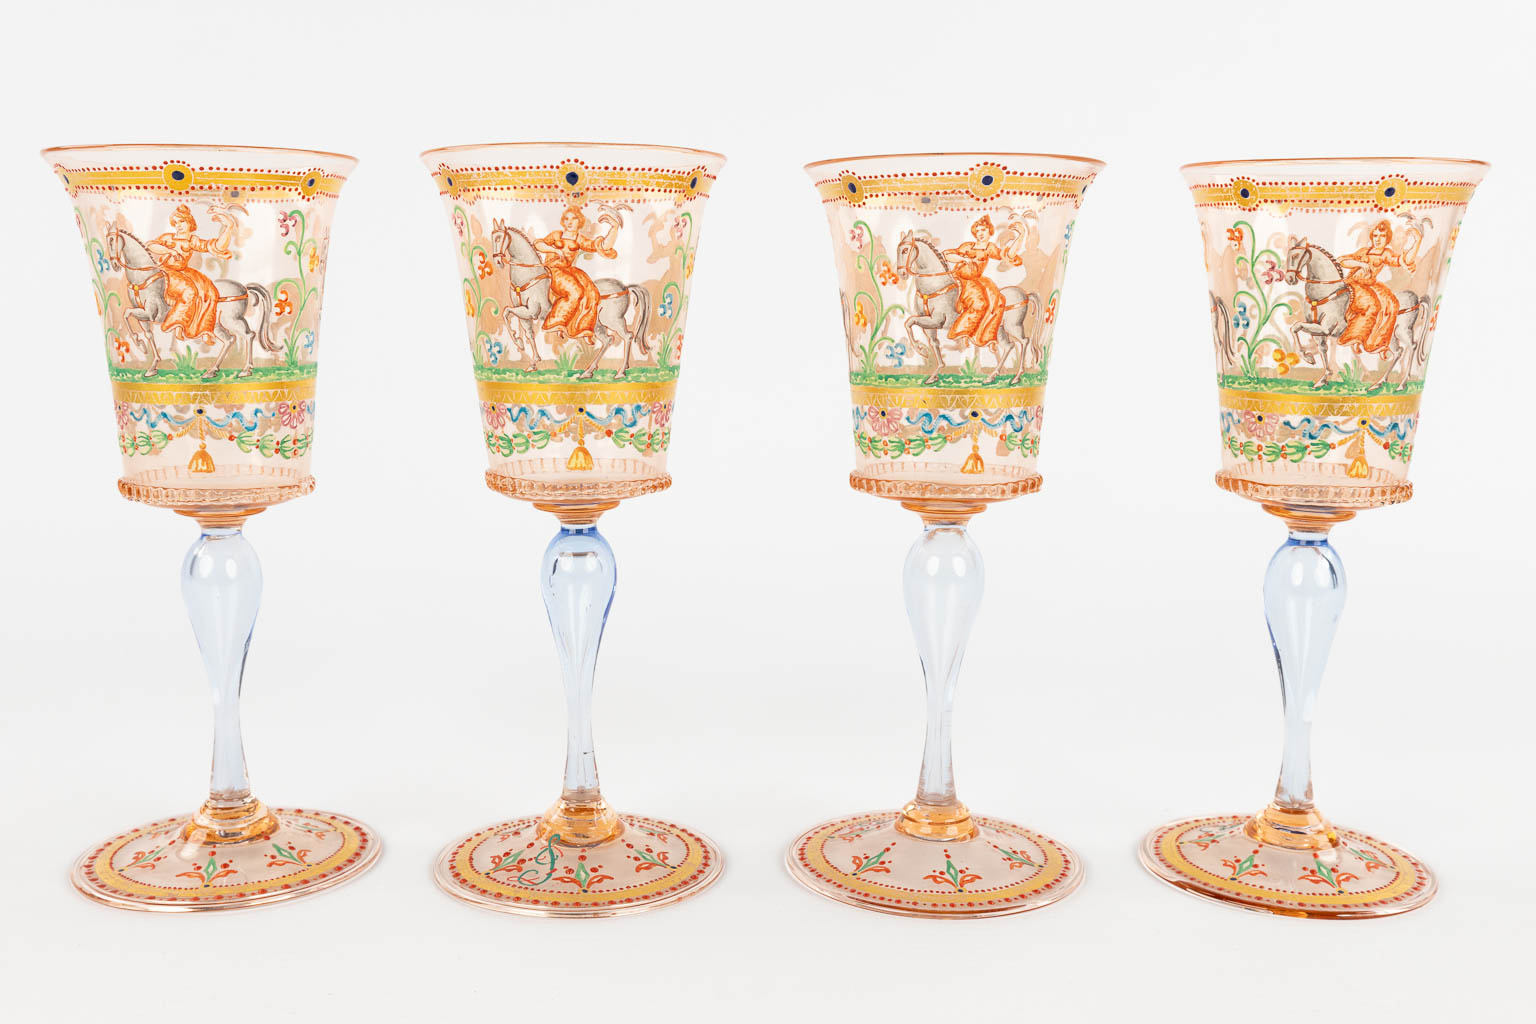 A set of 4 hand-painted and antique goblets, Murano, Salviati, 19th C. (H:17 x D:7 cm)